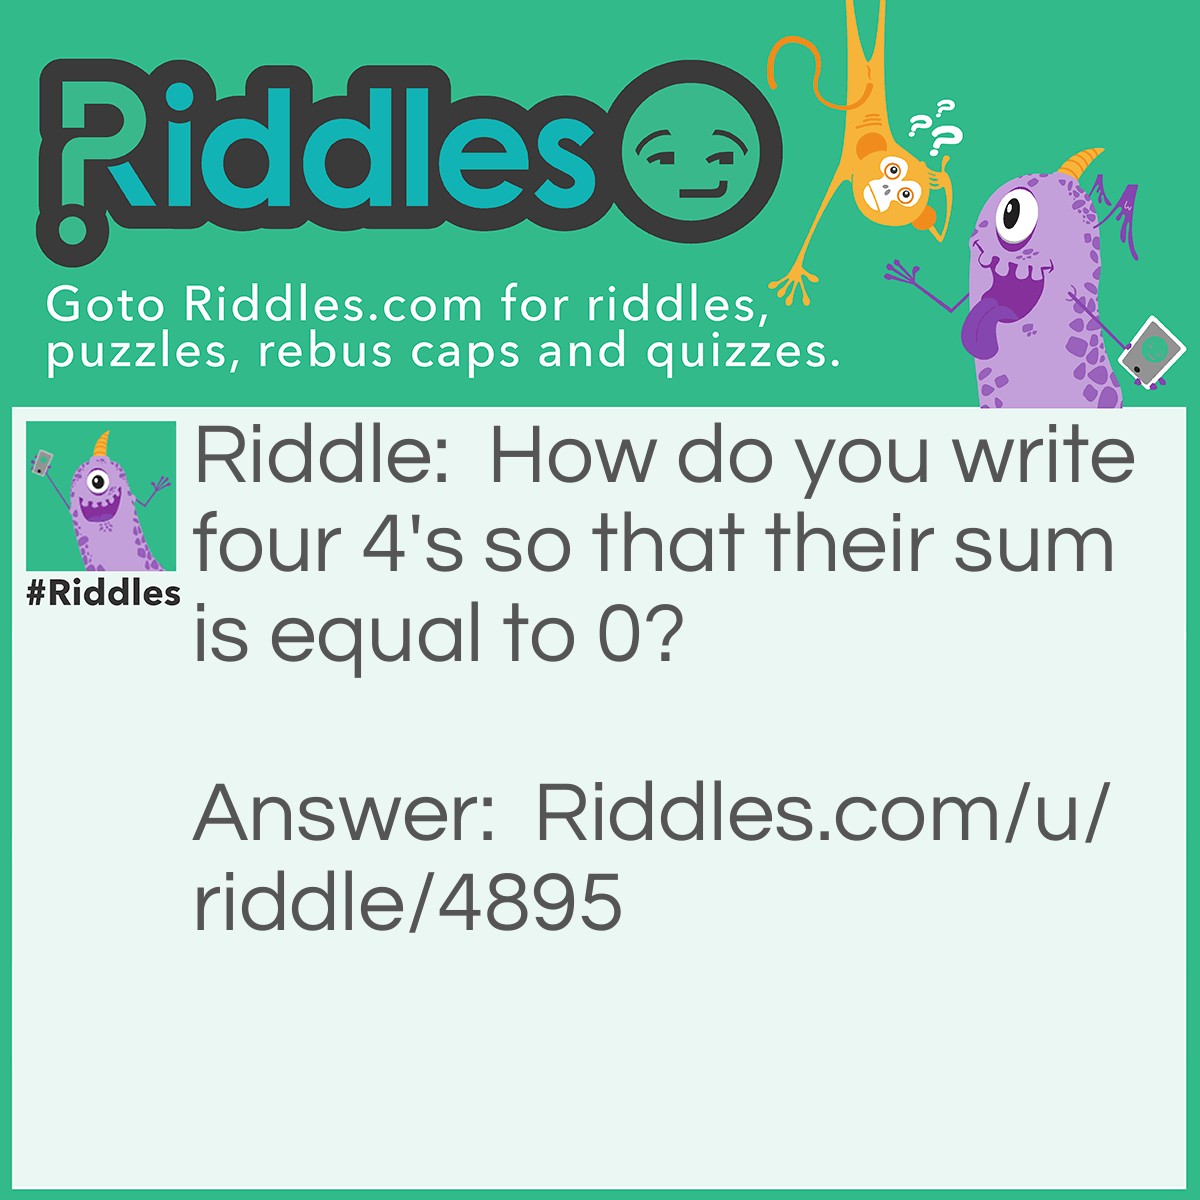 Riddle: How do you write four 4's so that their sum is equal to 0? Answer: 4+(-4)+4+(-4)=0.